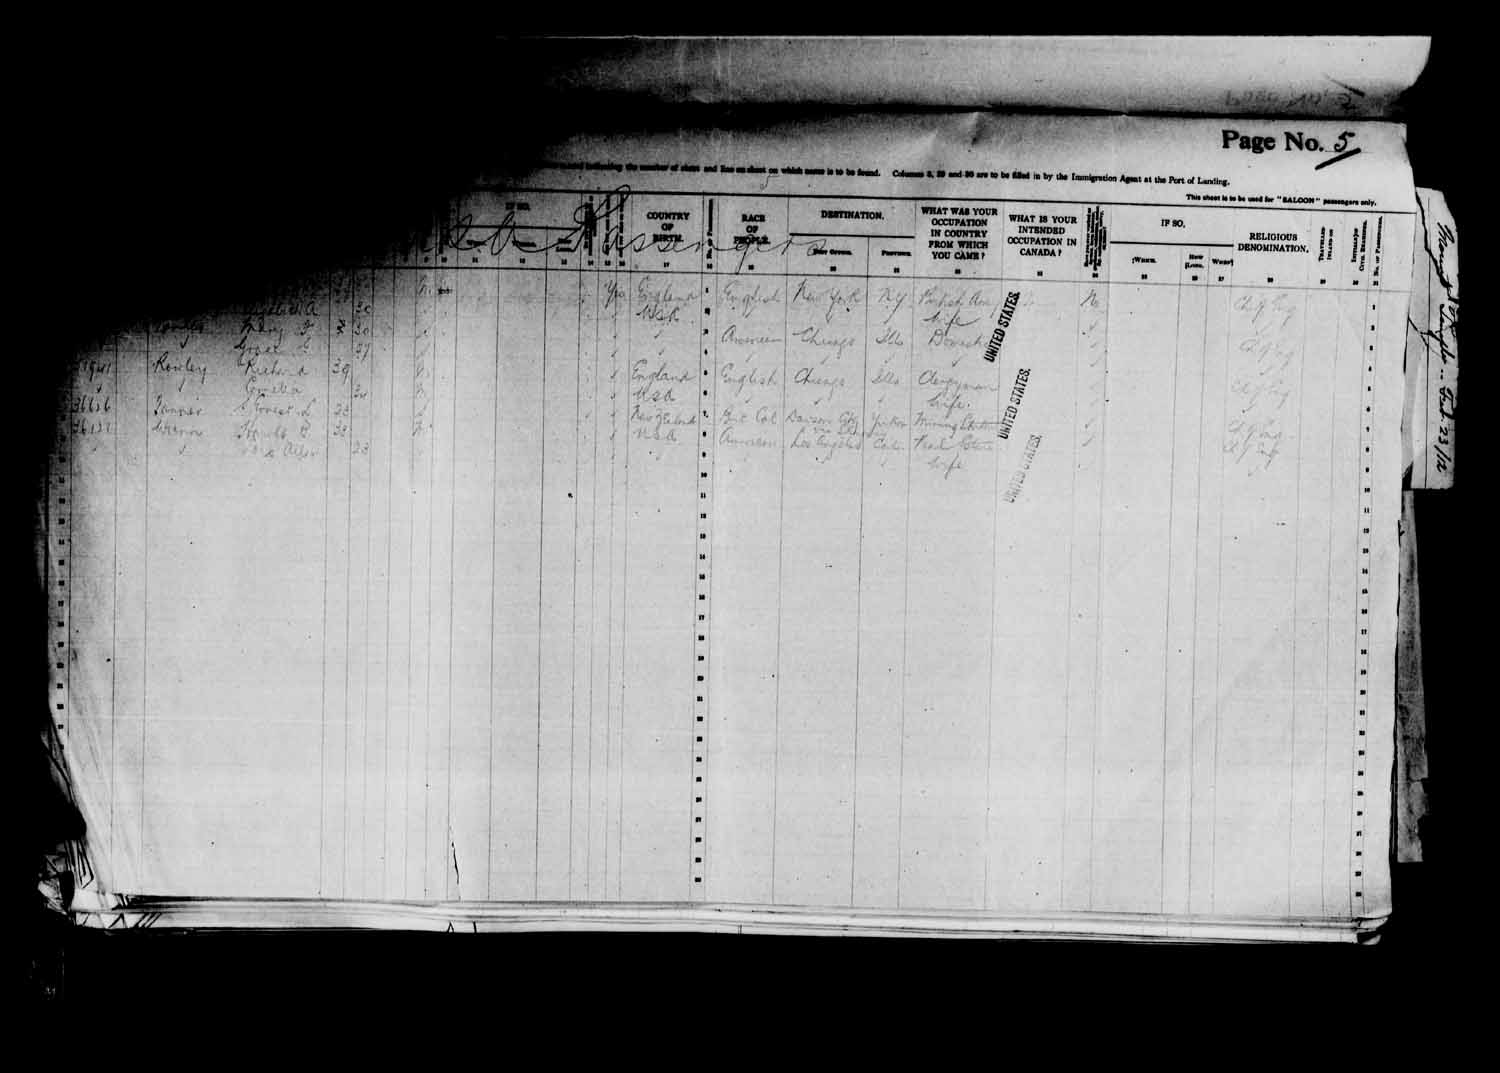 Digitized page of Passenger Lists for Image No.: e003627173